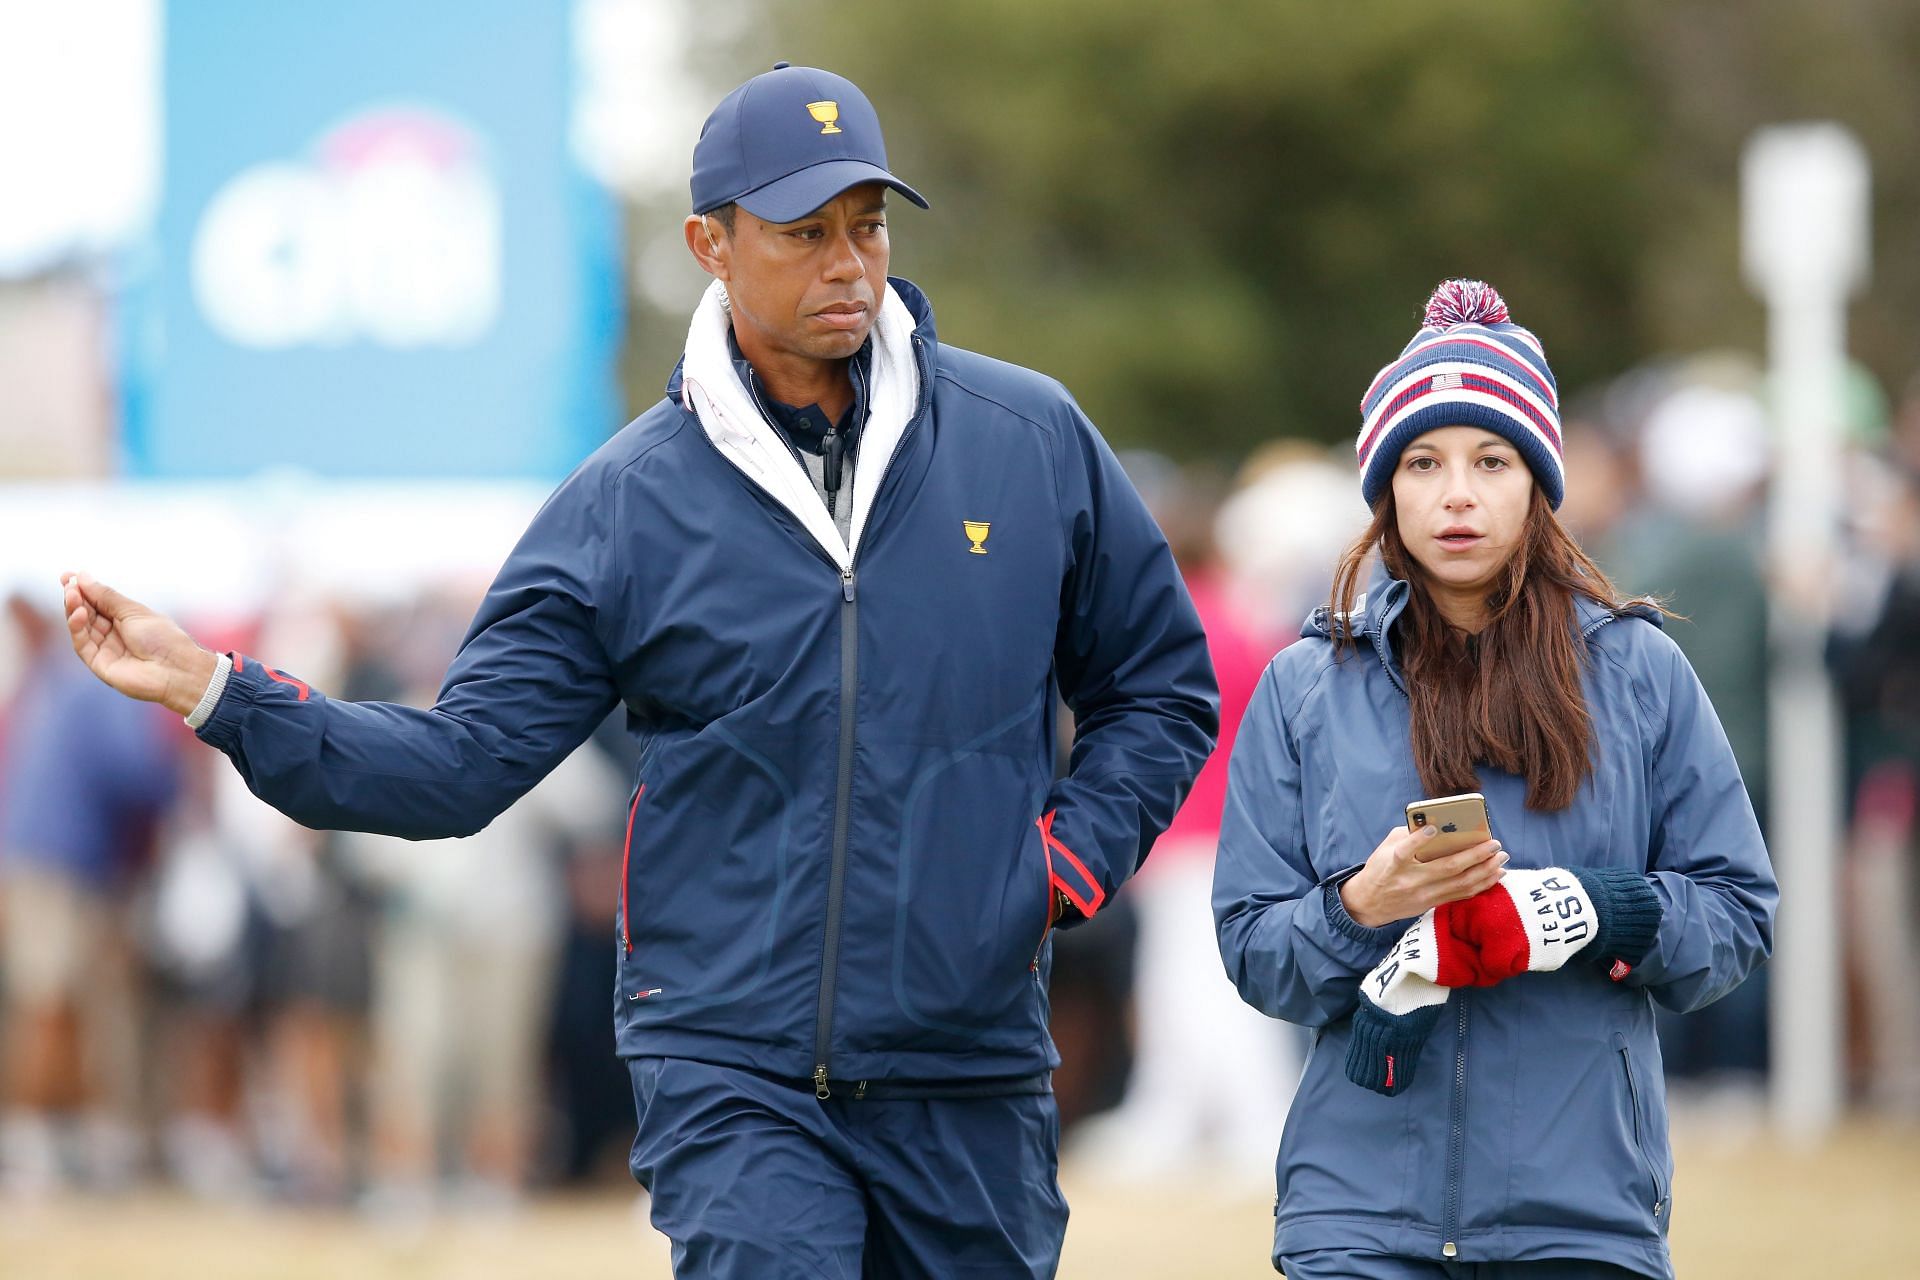 Tiger Woods and Erica Herman at the 2019 Presidents Cup - Day 3 (Photo via Darian Traynor/Getty Images)